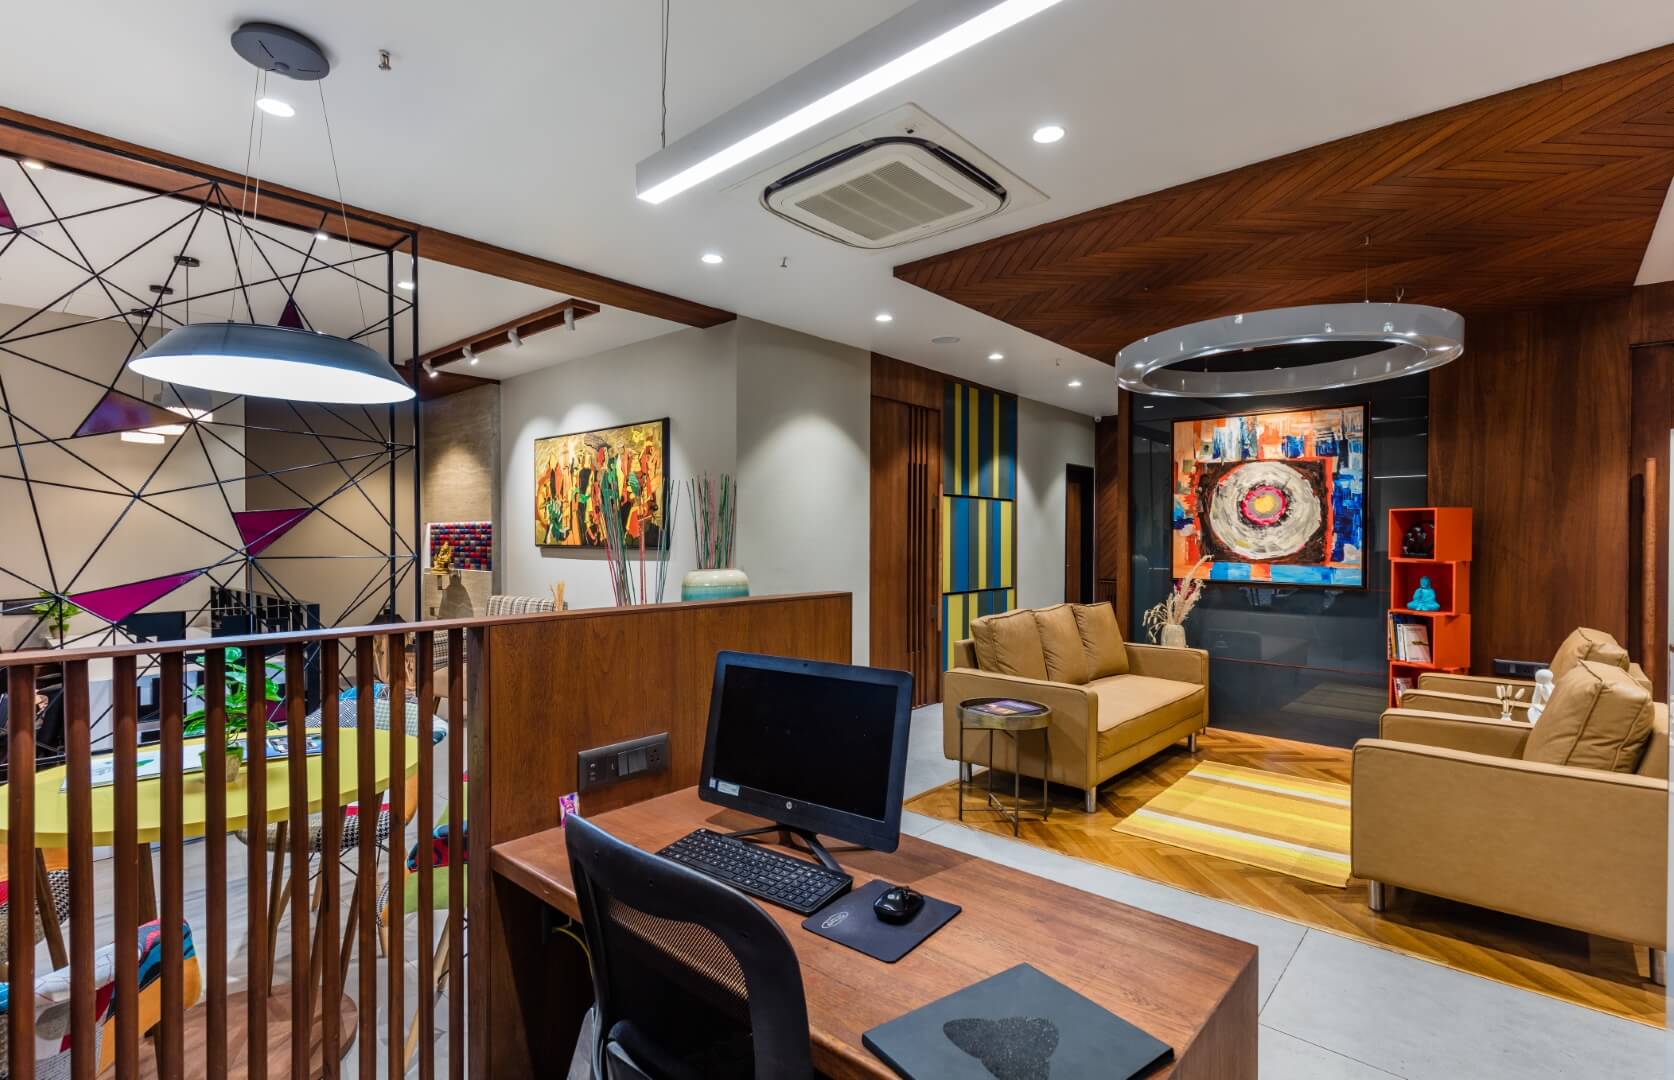 B Kesar Group - Best Architecture and Interior Photographer in India